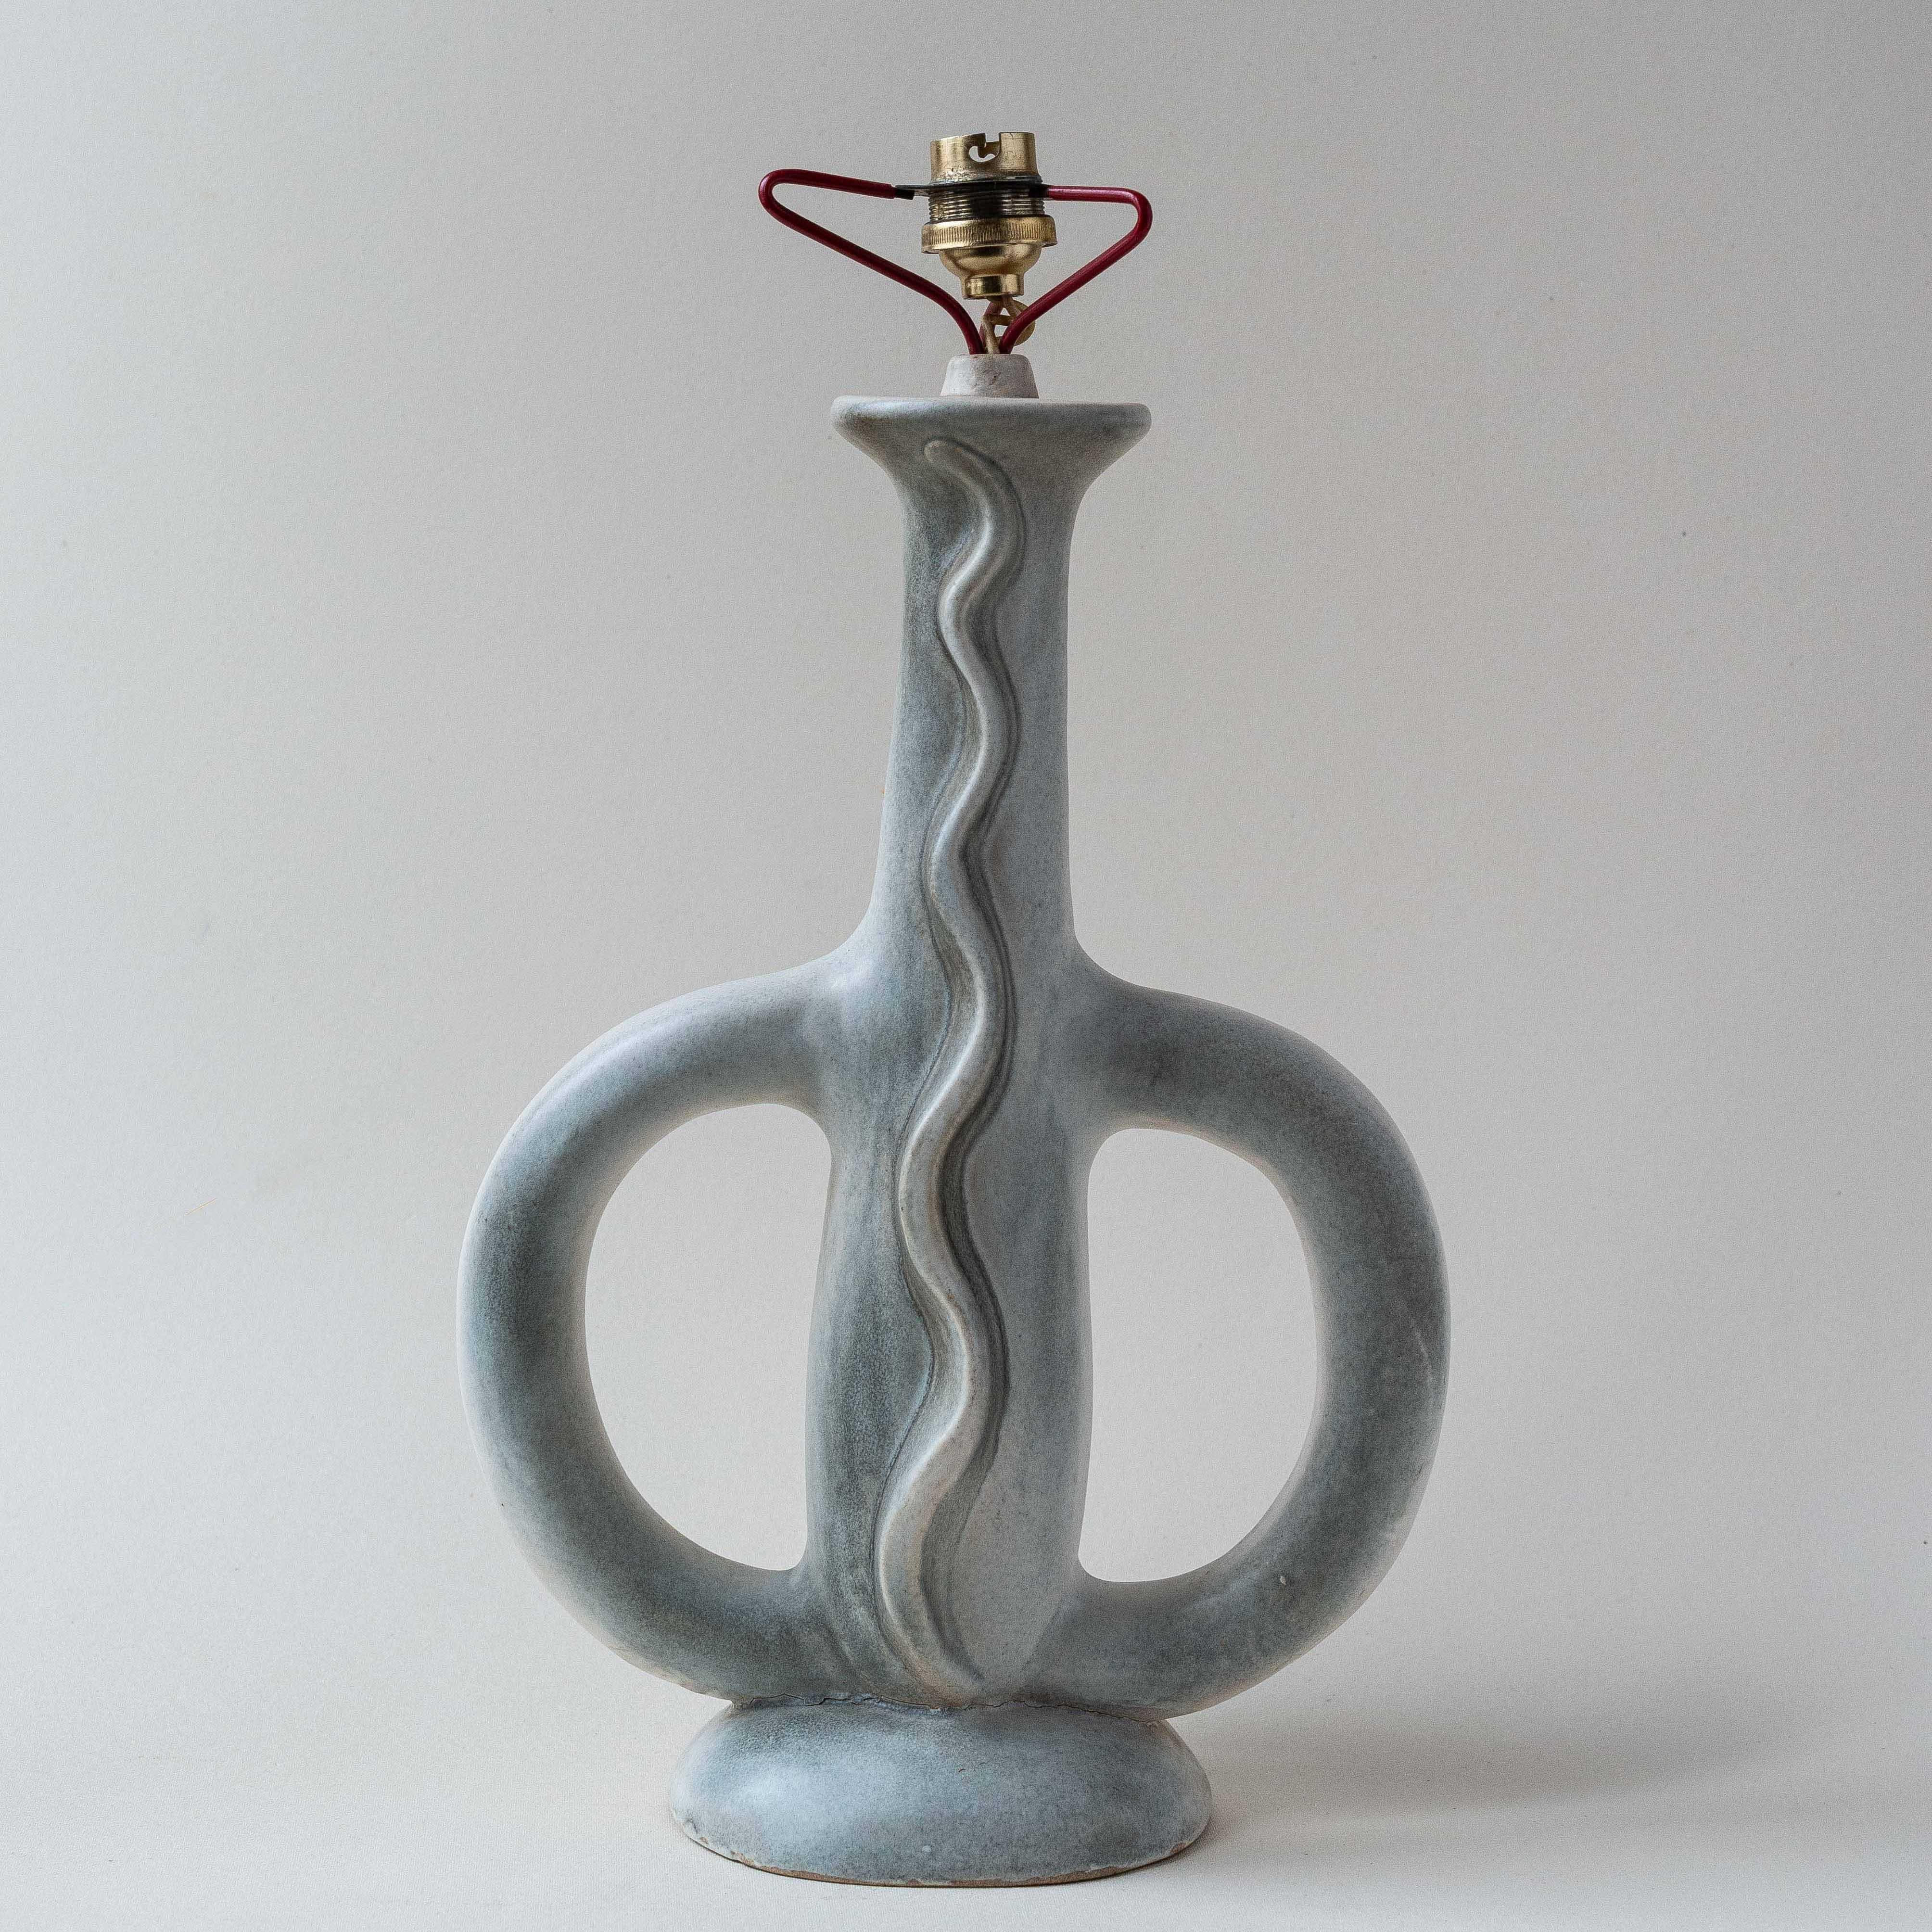 Gil Agnoloni Free-form lamp in bluish-grey glazed ceramic.

Very rare lamp by french ceramist Gil Agnoloni. 

The artist was famous for his zoomorphic black lamps. 

This one is a particularly exceptional one, with its singular shape and